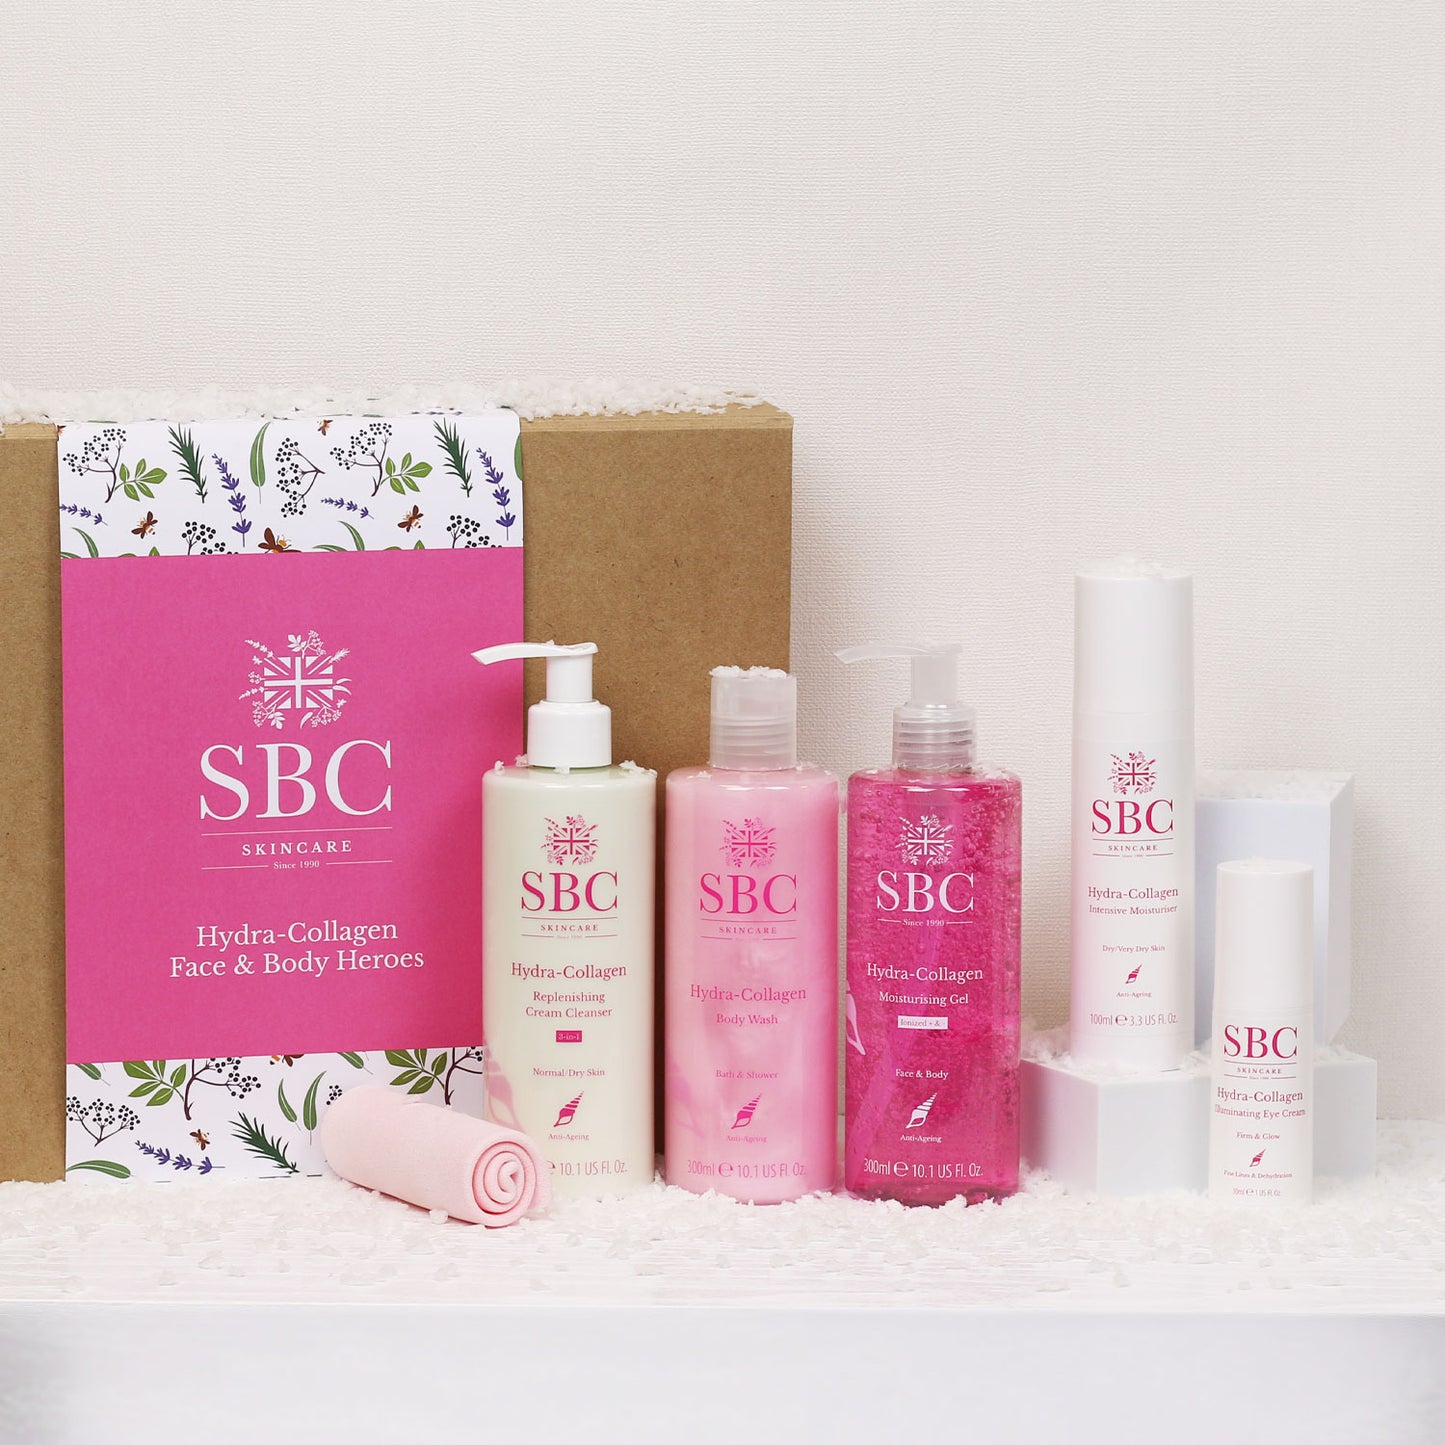 SBC Skincare’s Hydra-Collagen Face & Body Heroes gift set with the products out on a white background 